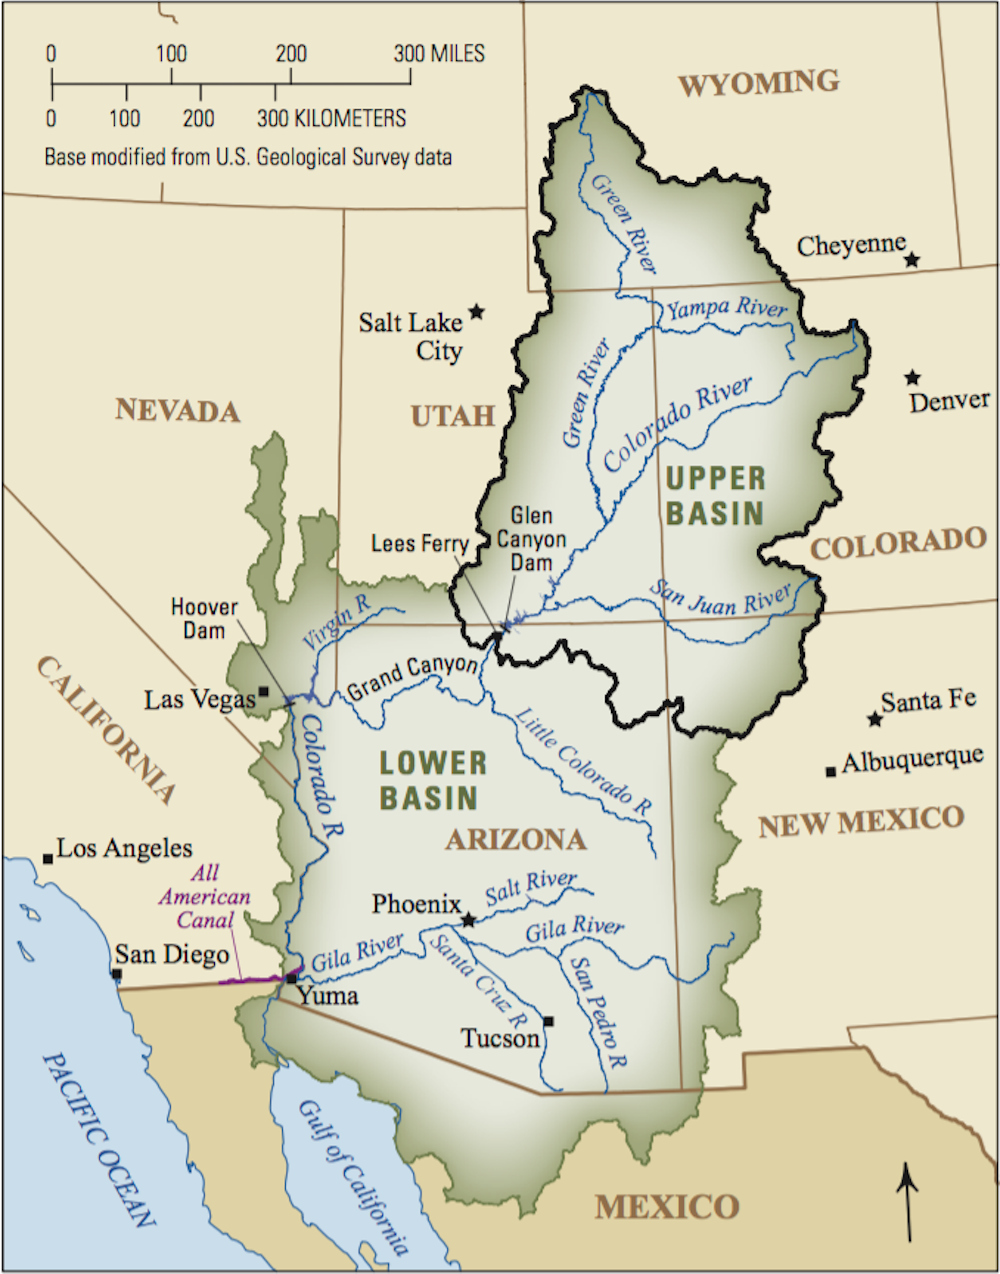 Colorado River Dams Map As Colorado River Basin States Confront Water Shortages, It's Time To Focus  On Reducing Demand